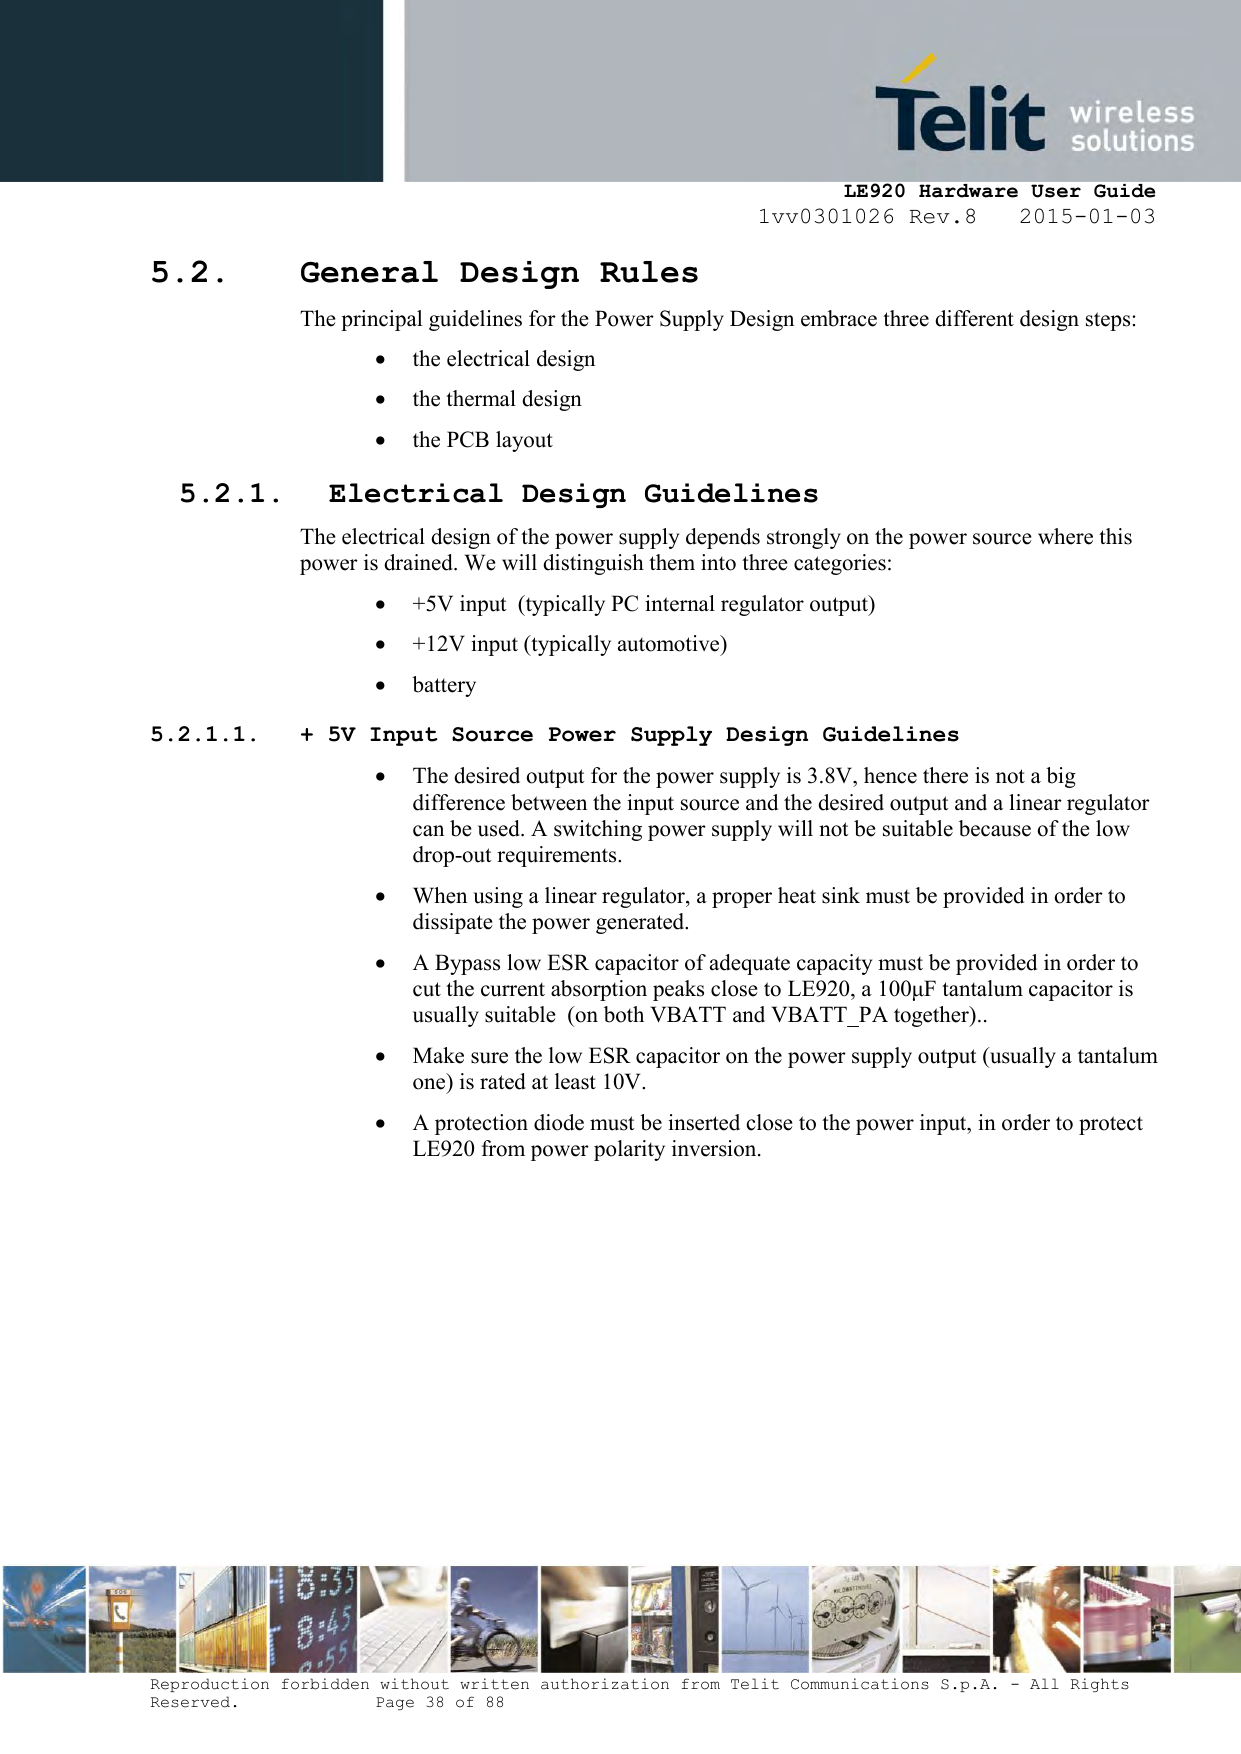     LE920 Hardware User Guide 1vv0301026 Rev.8   2015-01-03 Reproduction forbidden without written authorization from Telit Communications S.p.A. - All Rights Reserved.    Page 38 of 88  5.2. General Design Rules The principal guidelines for the Power Supply Design embrace three different design steps:  the electrical design  the thermal design  the PCB layout 5.2.1. Electrical Design Guidelines The electrical design of the power supply depends strongly on the power source where this power is drained. We will distinguish them into three categories:  +5V input  (typically PC internal regulator output)  +12V input (typically automotive)  battery 5.2.1.1. + 5V Input Source Power Supply Design Guidelines  The desired output for the power supply is 3.8V, hence there is not a big difference between the input source and the desired output and a linear regulator can be used. A switching power supply will not be suitable because of the low drop-out requirements.  When using a linear regulator, a proper heat sink must be provided in order to dissipate the power generated.  A Bypass low ESR capacitor of adequate capacity must be provided in order to cut the current absorption peaks close to LE920, a 100μF tantalum capacitor is usually suitable  (on both VBATT and VBATT_PA together)..  Make sure the low ESR capacitor on the power supply output (usually a tantalum one) is rated at least 10V.  A protection diode must be inserted close to the power input, in order to protect LE920 from power polarity inversion.       